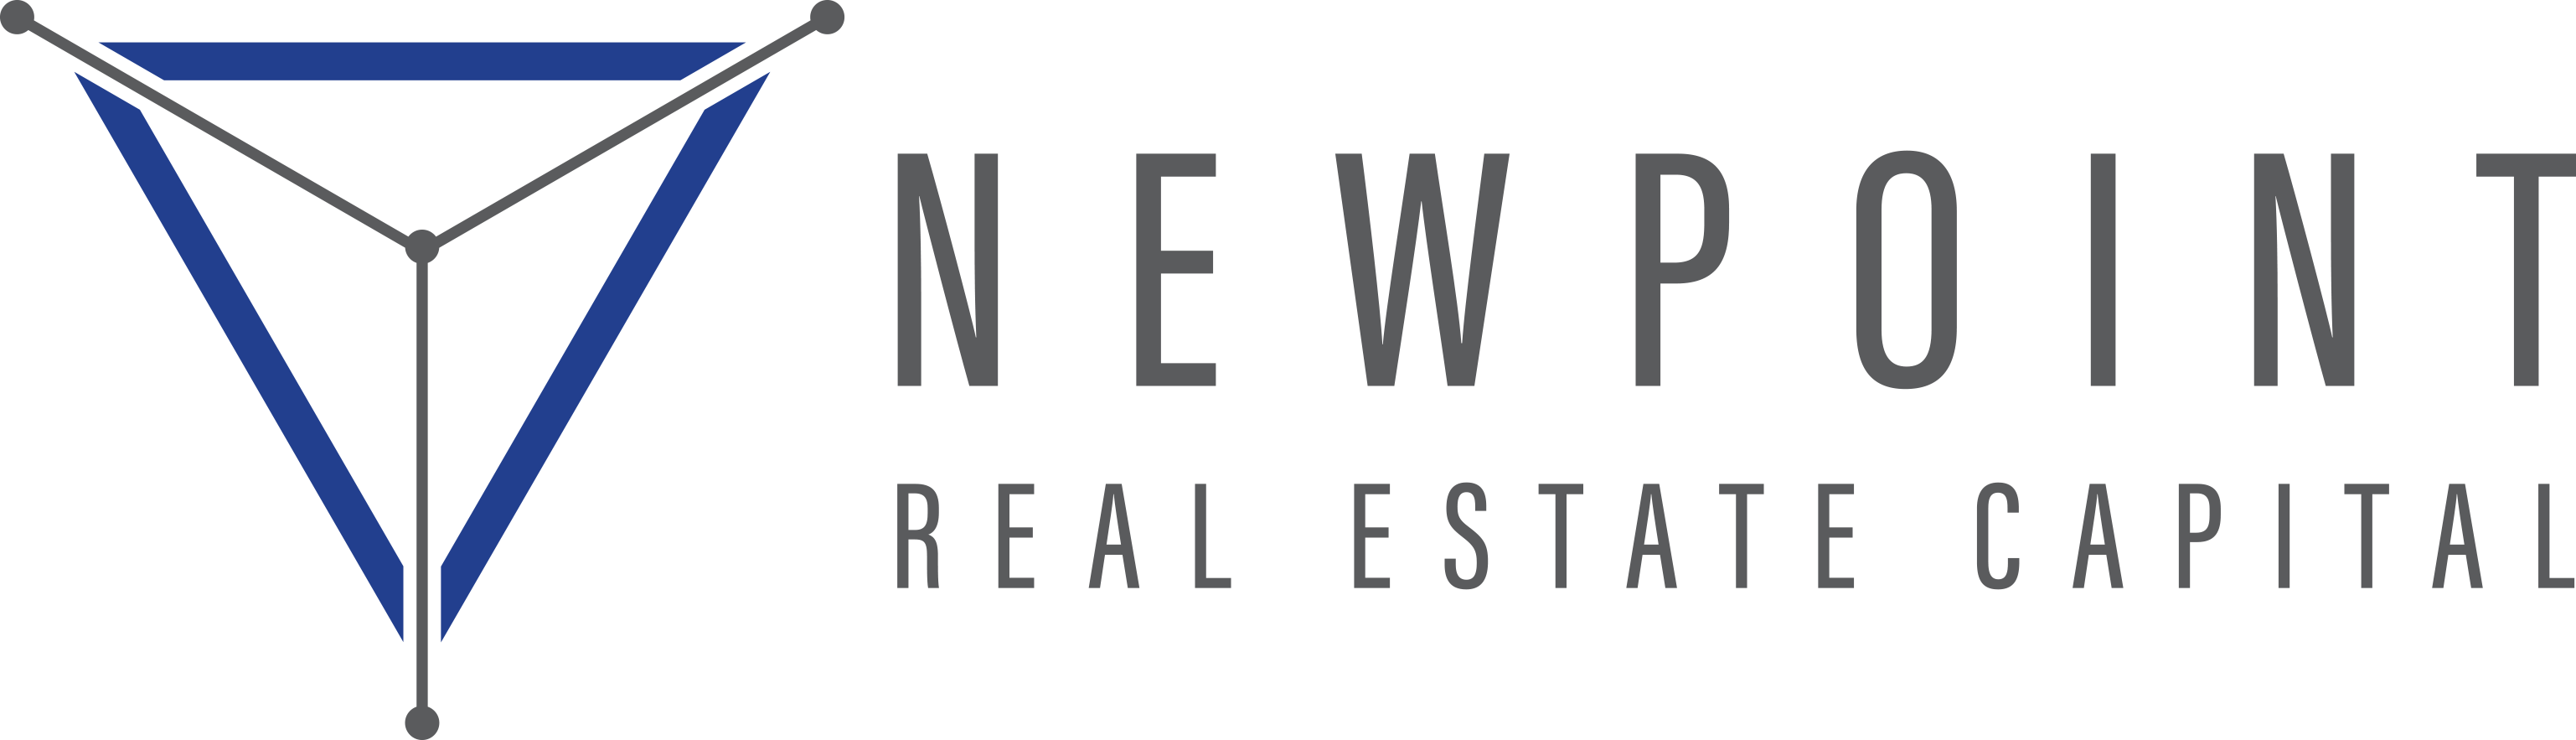 Newpoint Real Estate Capital